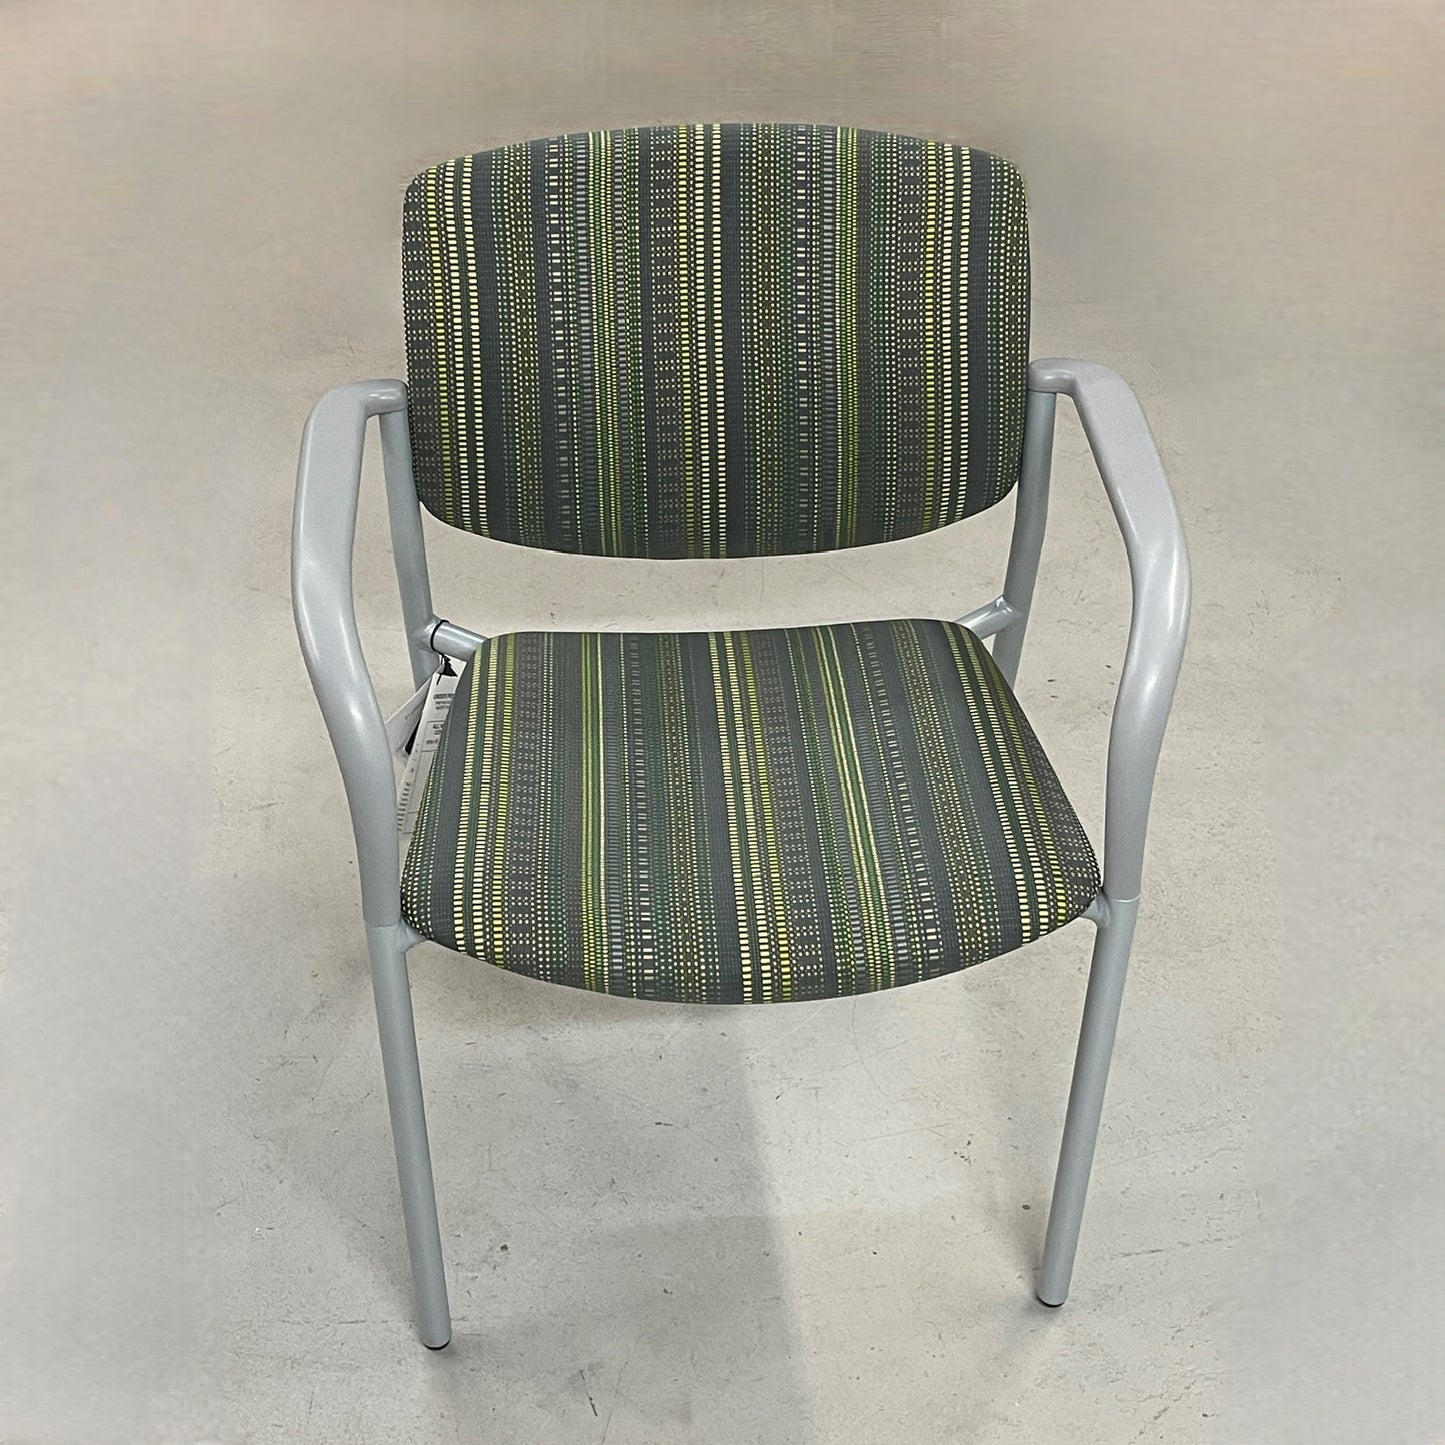 SITONIT Seating Low Back Stationary Upholstered Side Chair Freelance 350 LB Green Pattern (New)